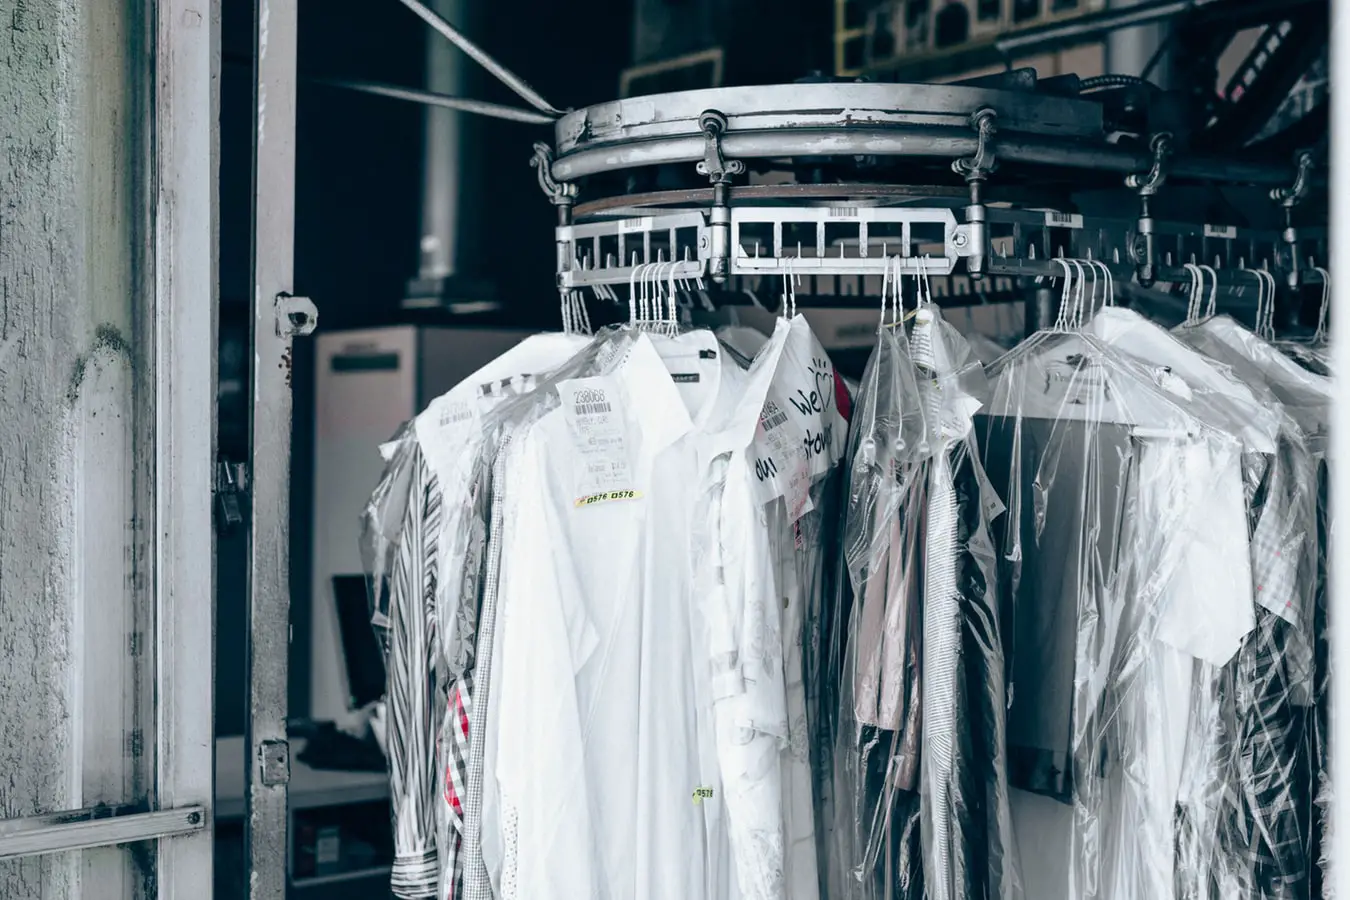 How to Start a Dry Cleaning Business